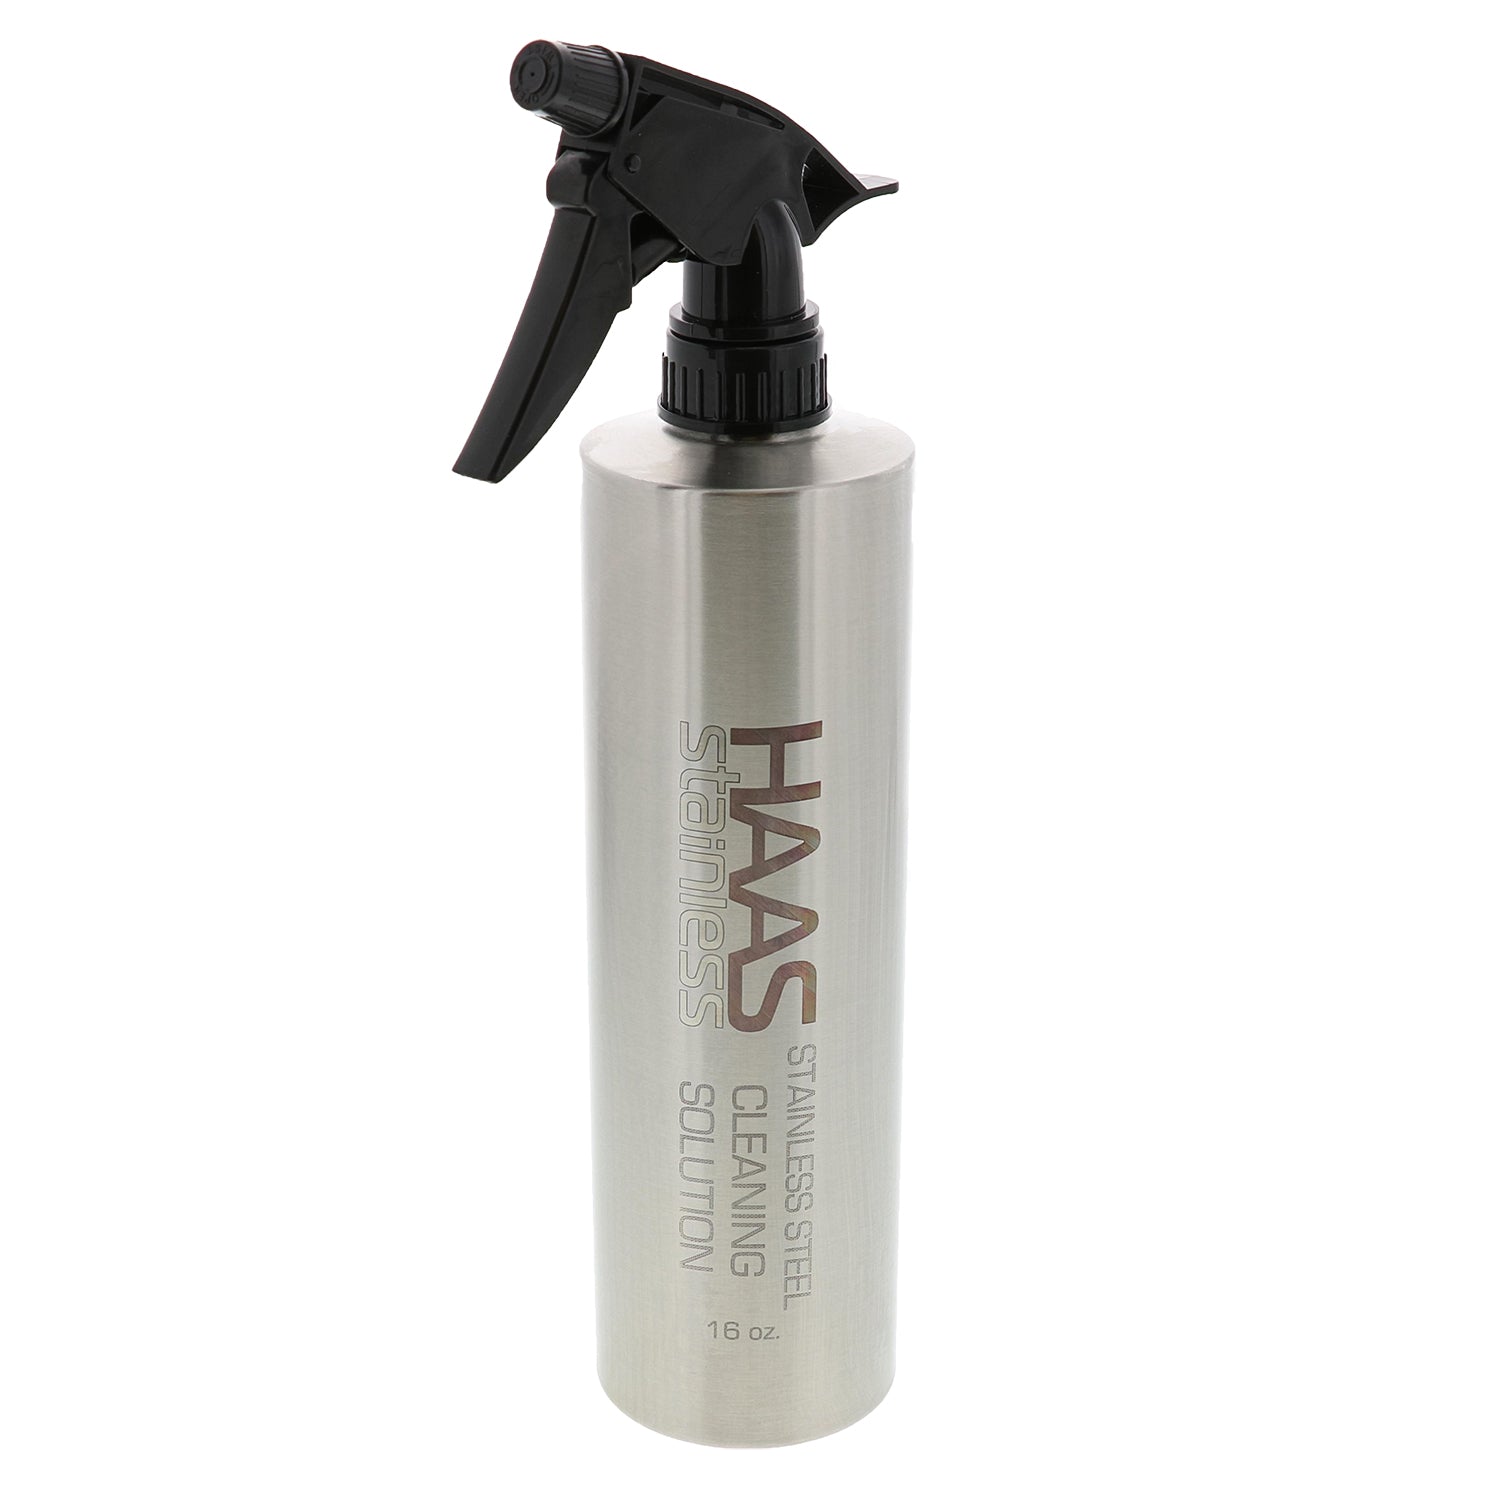 Haas Stainless Steel Cleaning Solution